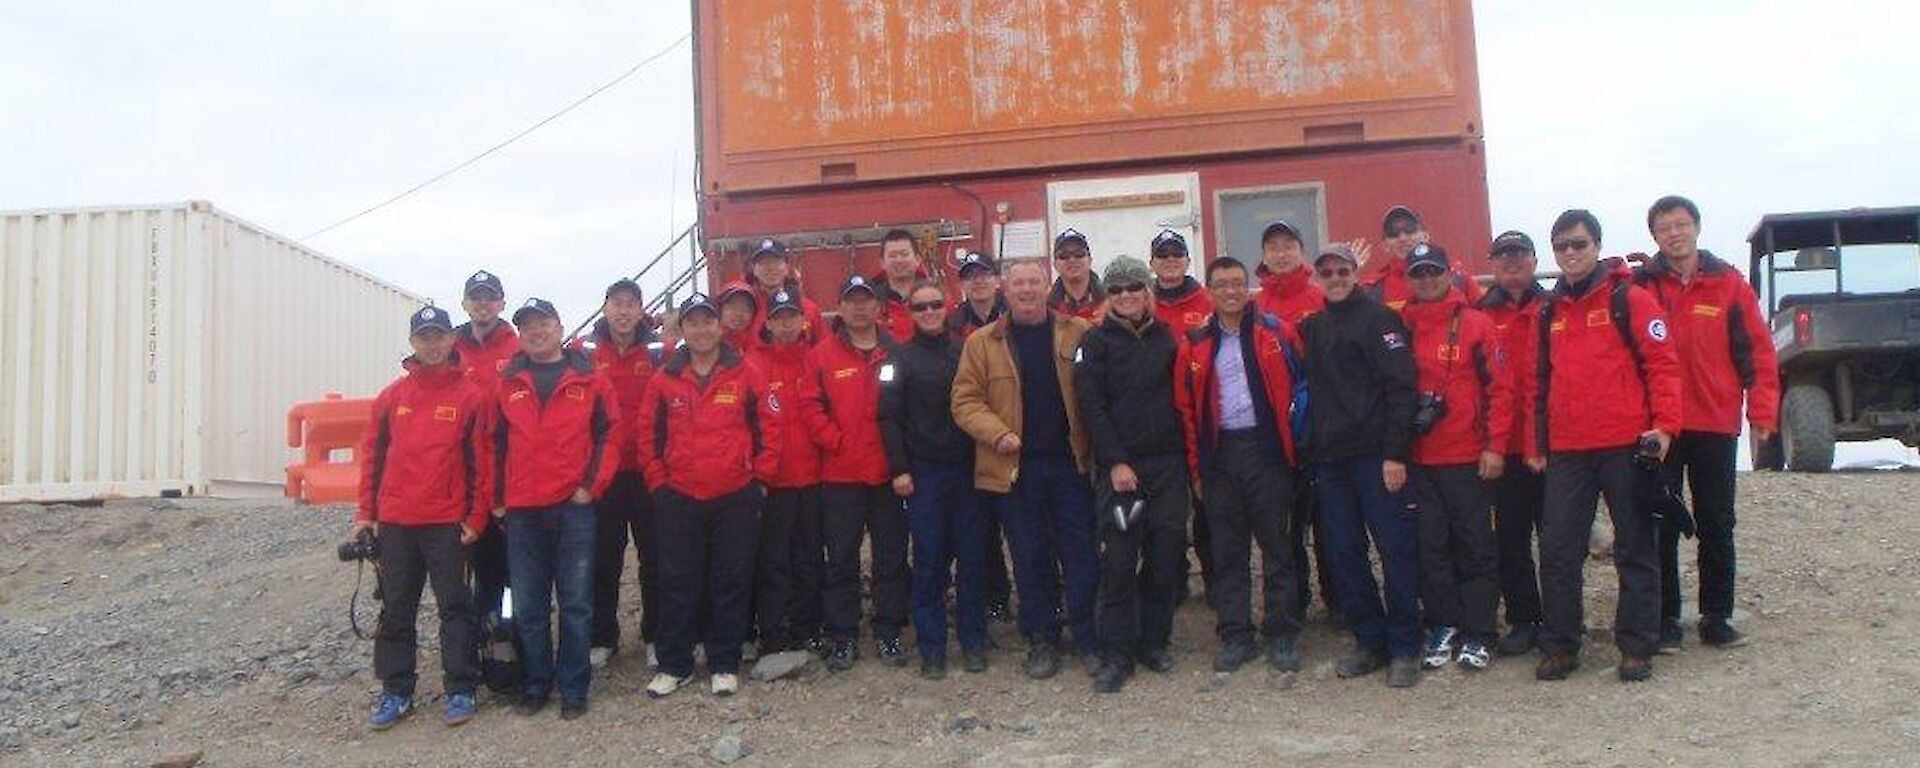 Chinese expeditioners pose for a photo at Davis